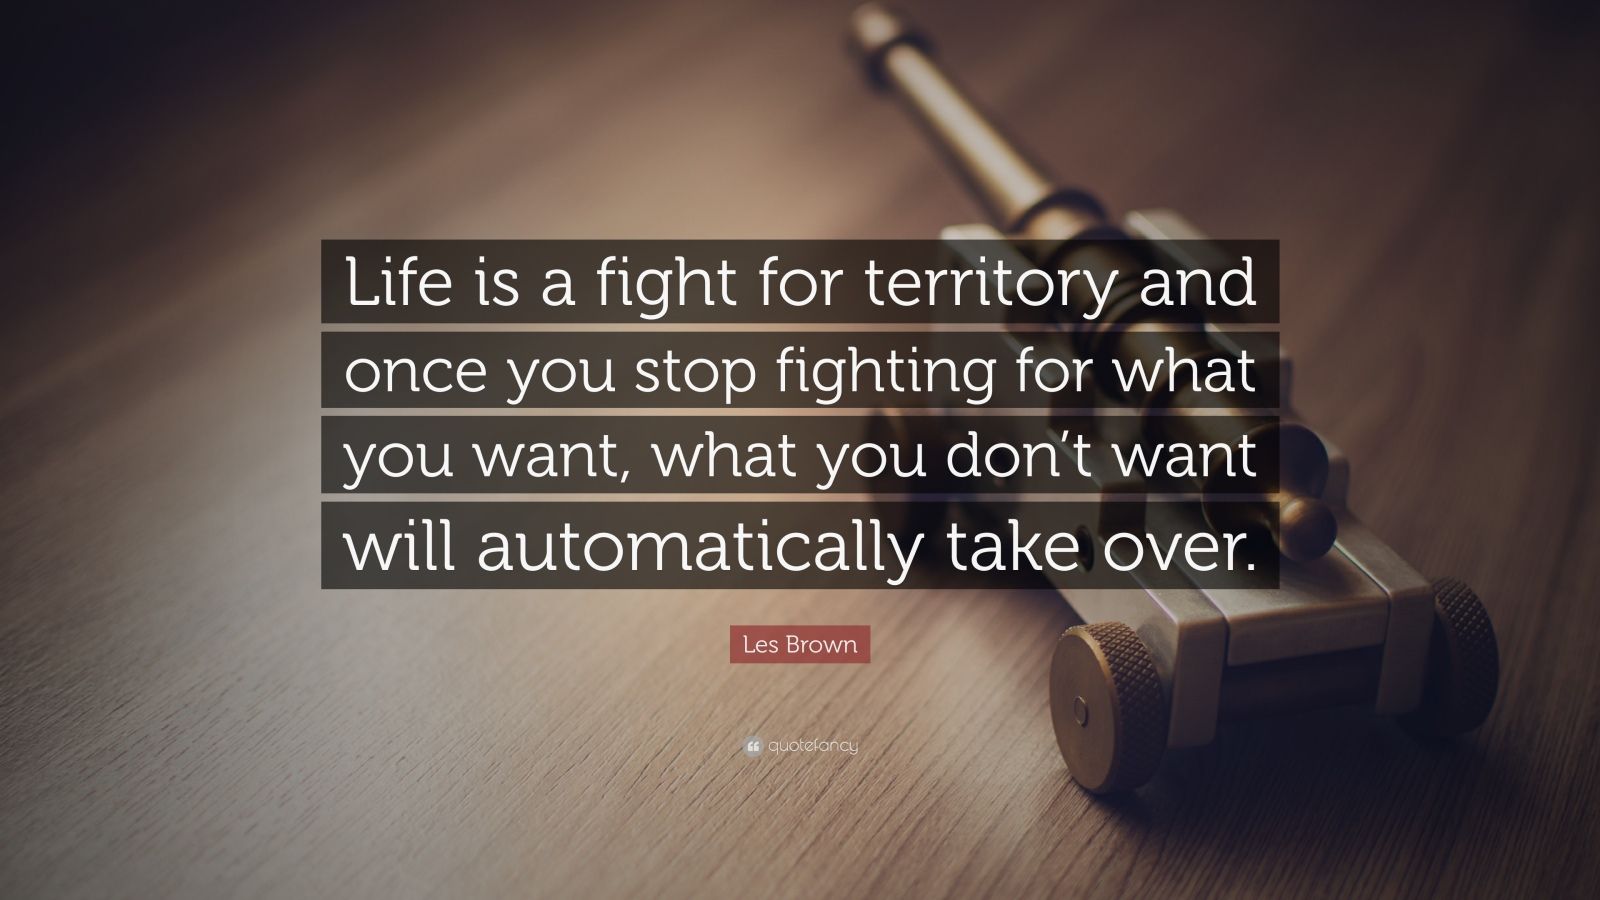 Les Brown Quote: “Life is a fight for territory and once you stop